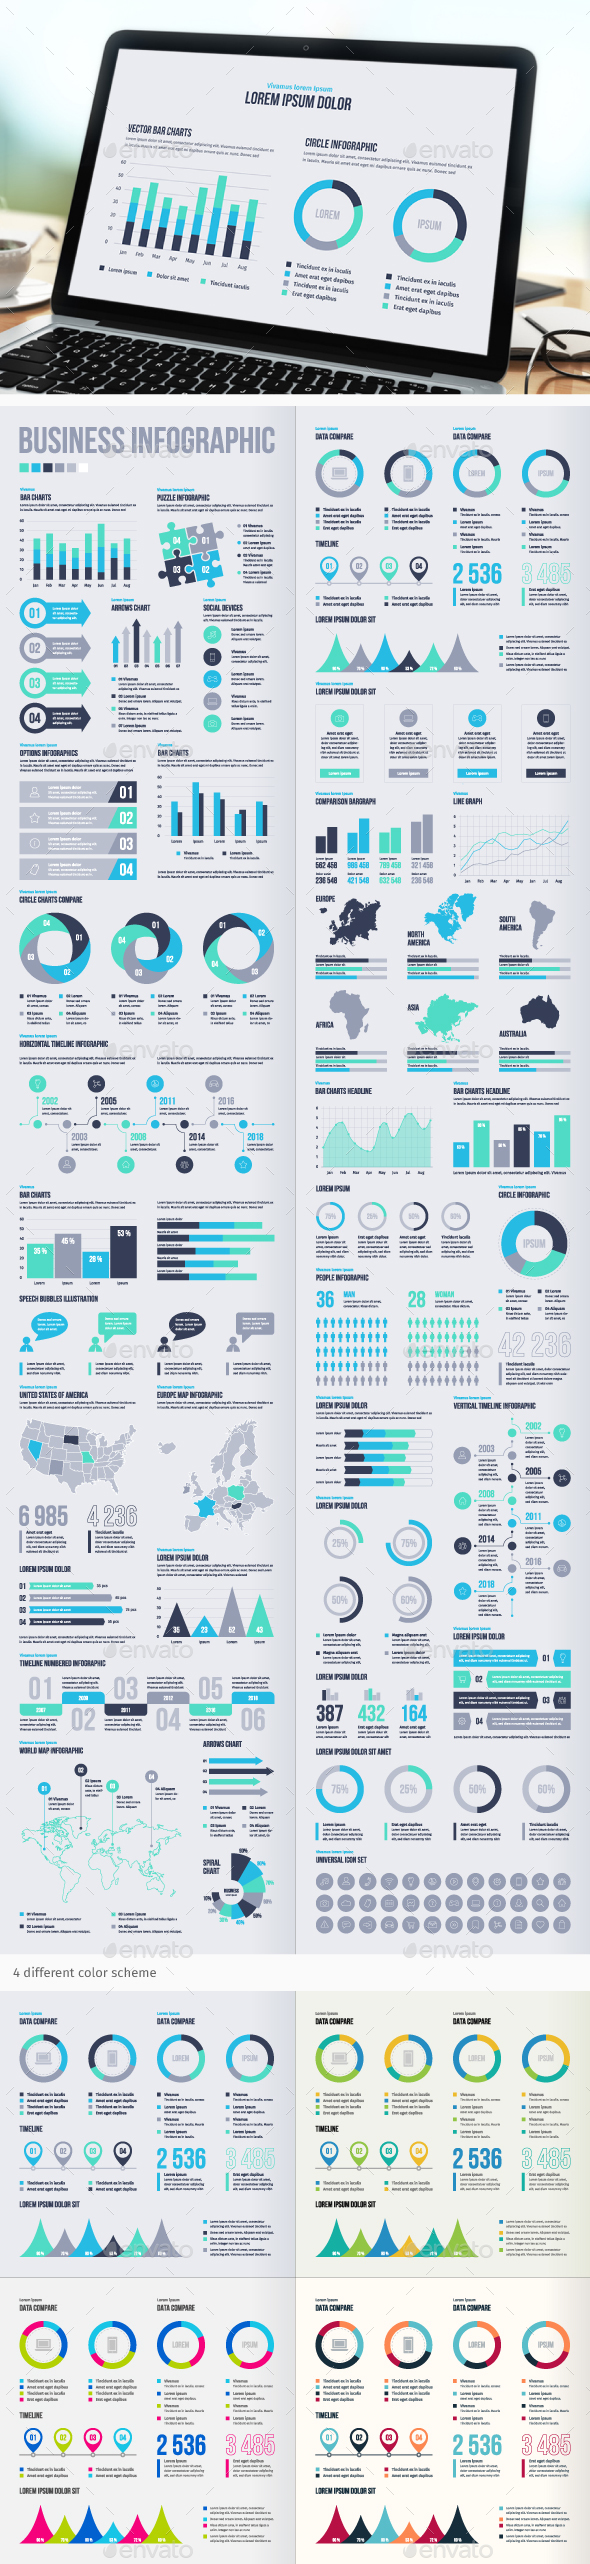 GraphicRiver Business Infographic Elements 21046303